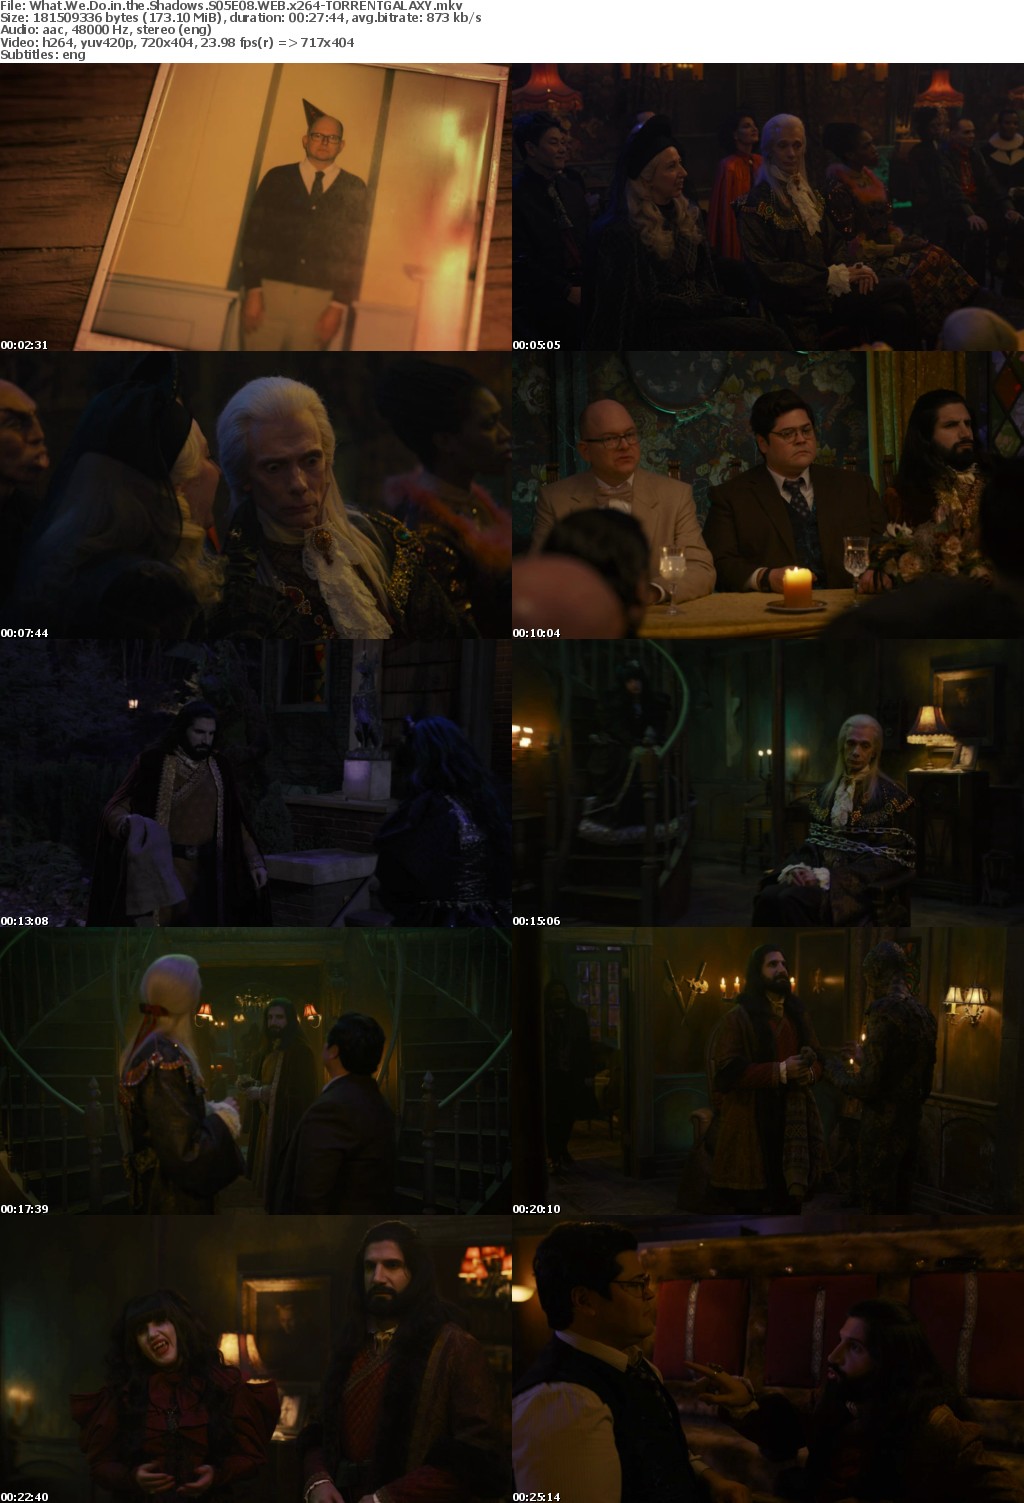 What We Do in the Shadows S05E08 WEB x264-GALAXY